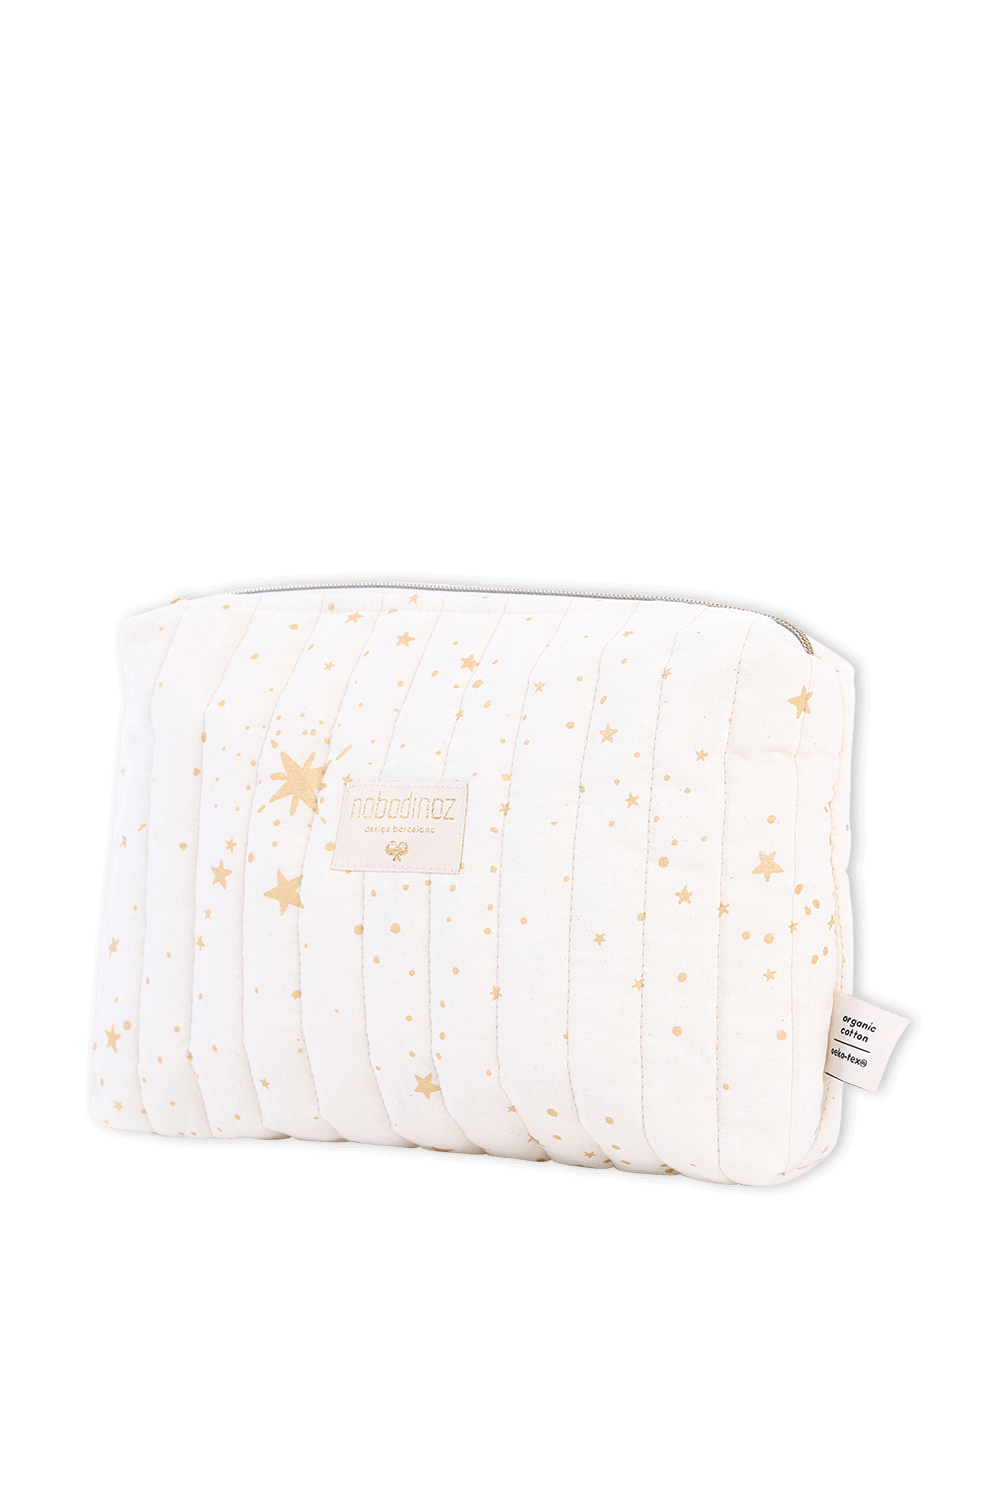 Travel Toiletry Bag in Gold and Cream NOBODINOZ